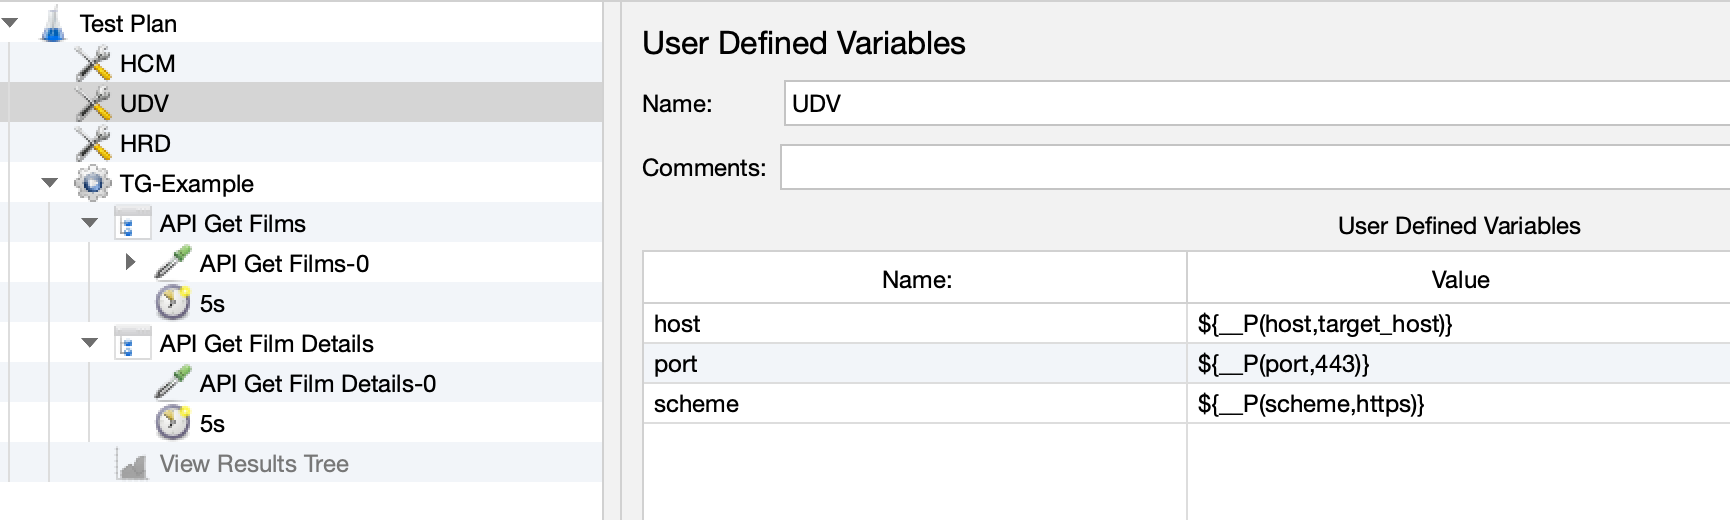 user defined variables